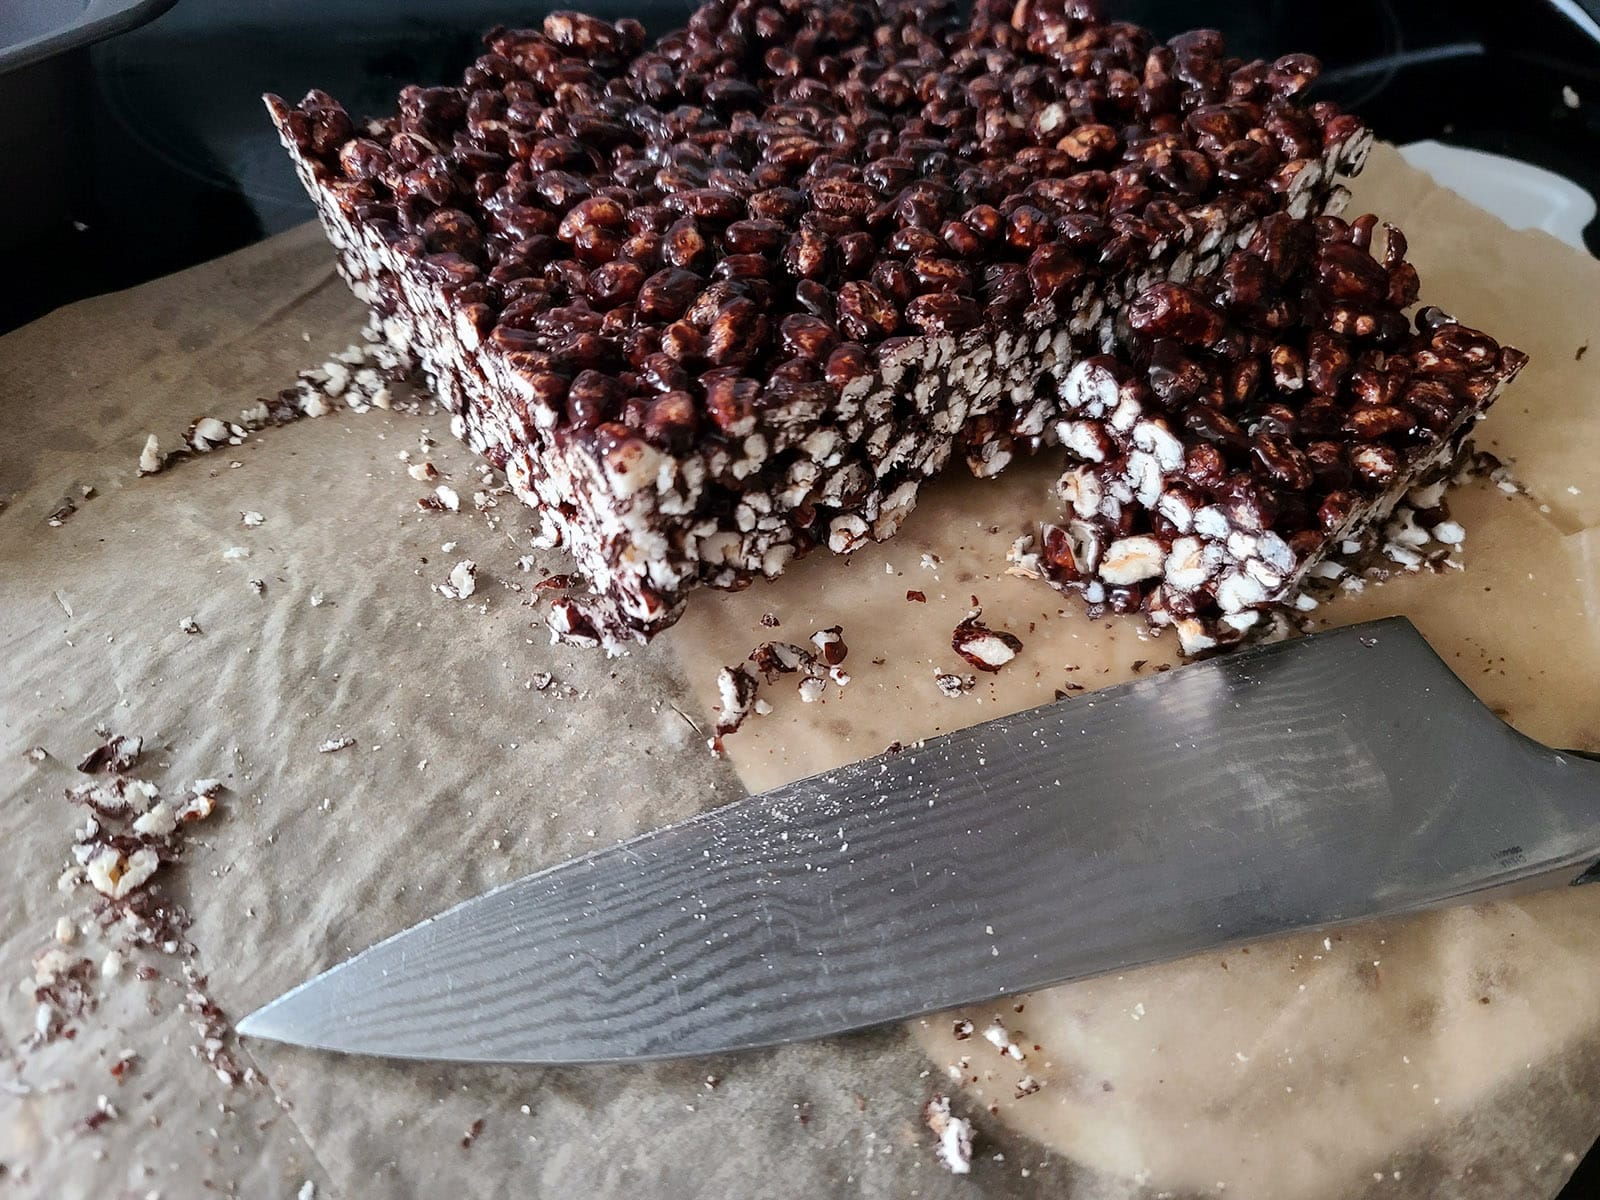 A slab of puffed wheat squares being cut.